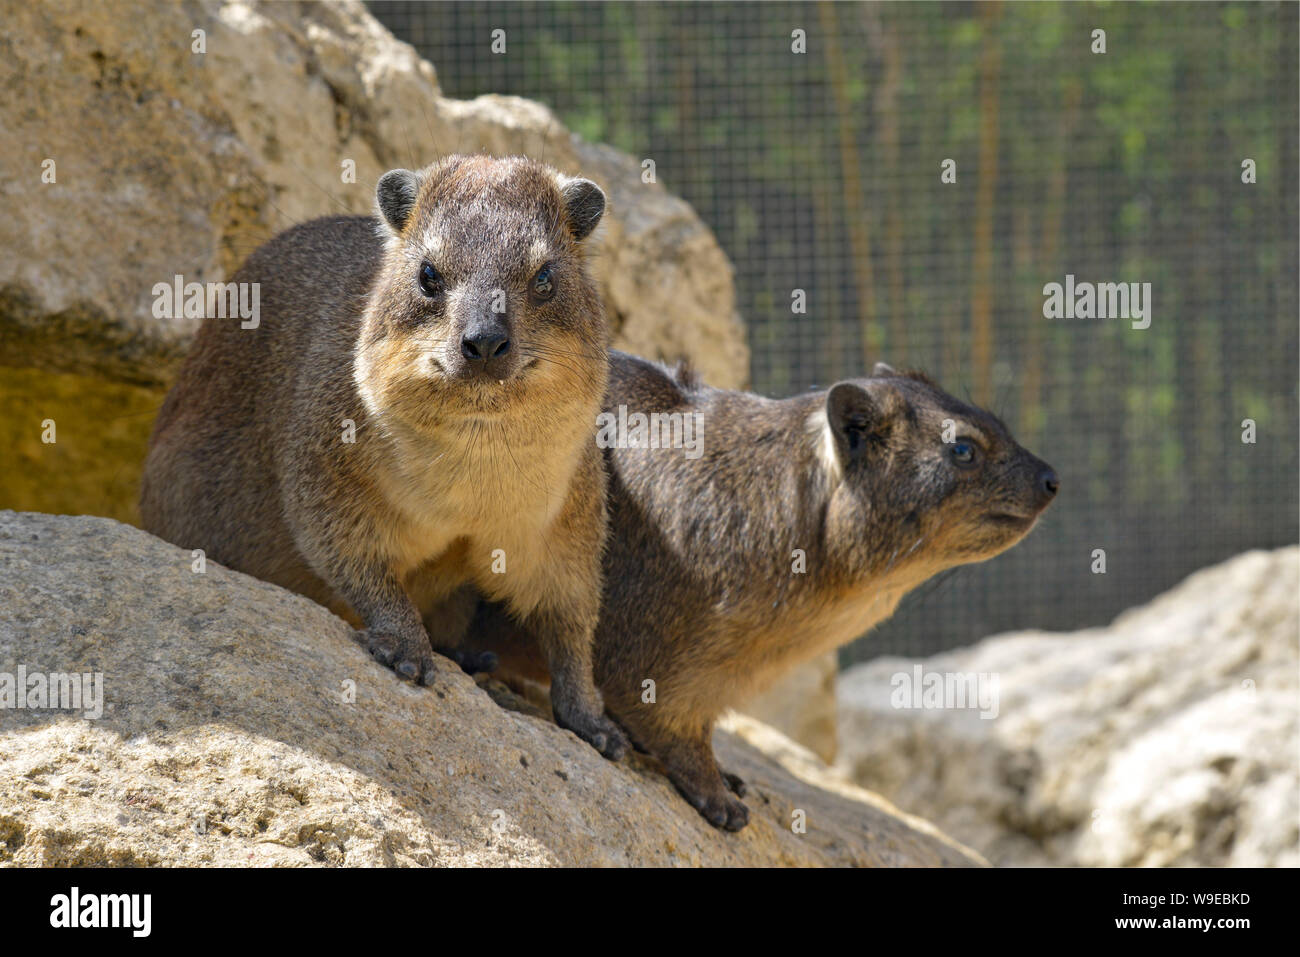 Two rock hyrax (Procavia capensis) also called dassies on stone Stock Photo